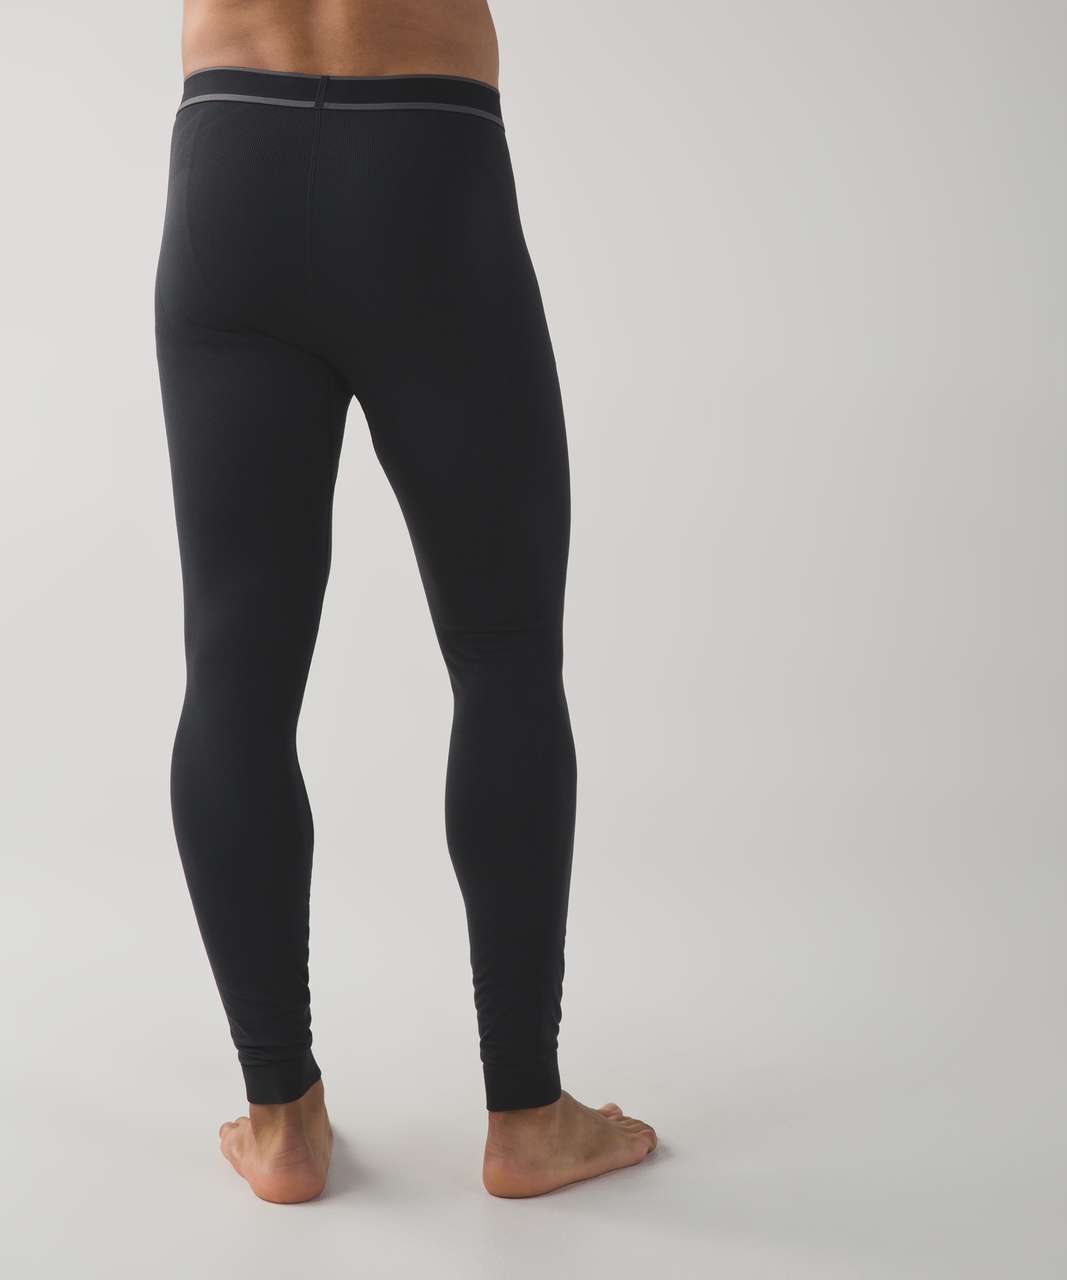 🍋 Lululemon NWT Keep the Heat Thermal Legging Tights in Iron Blue XL M4